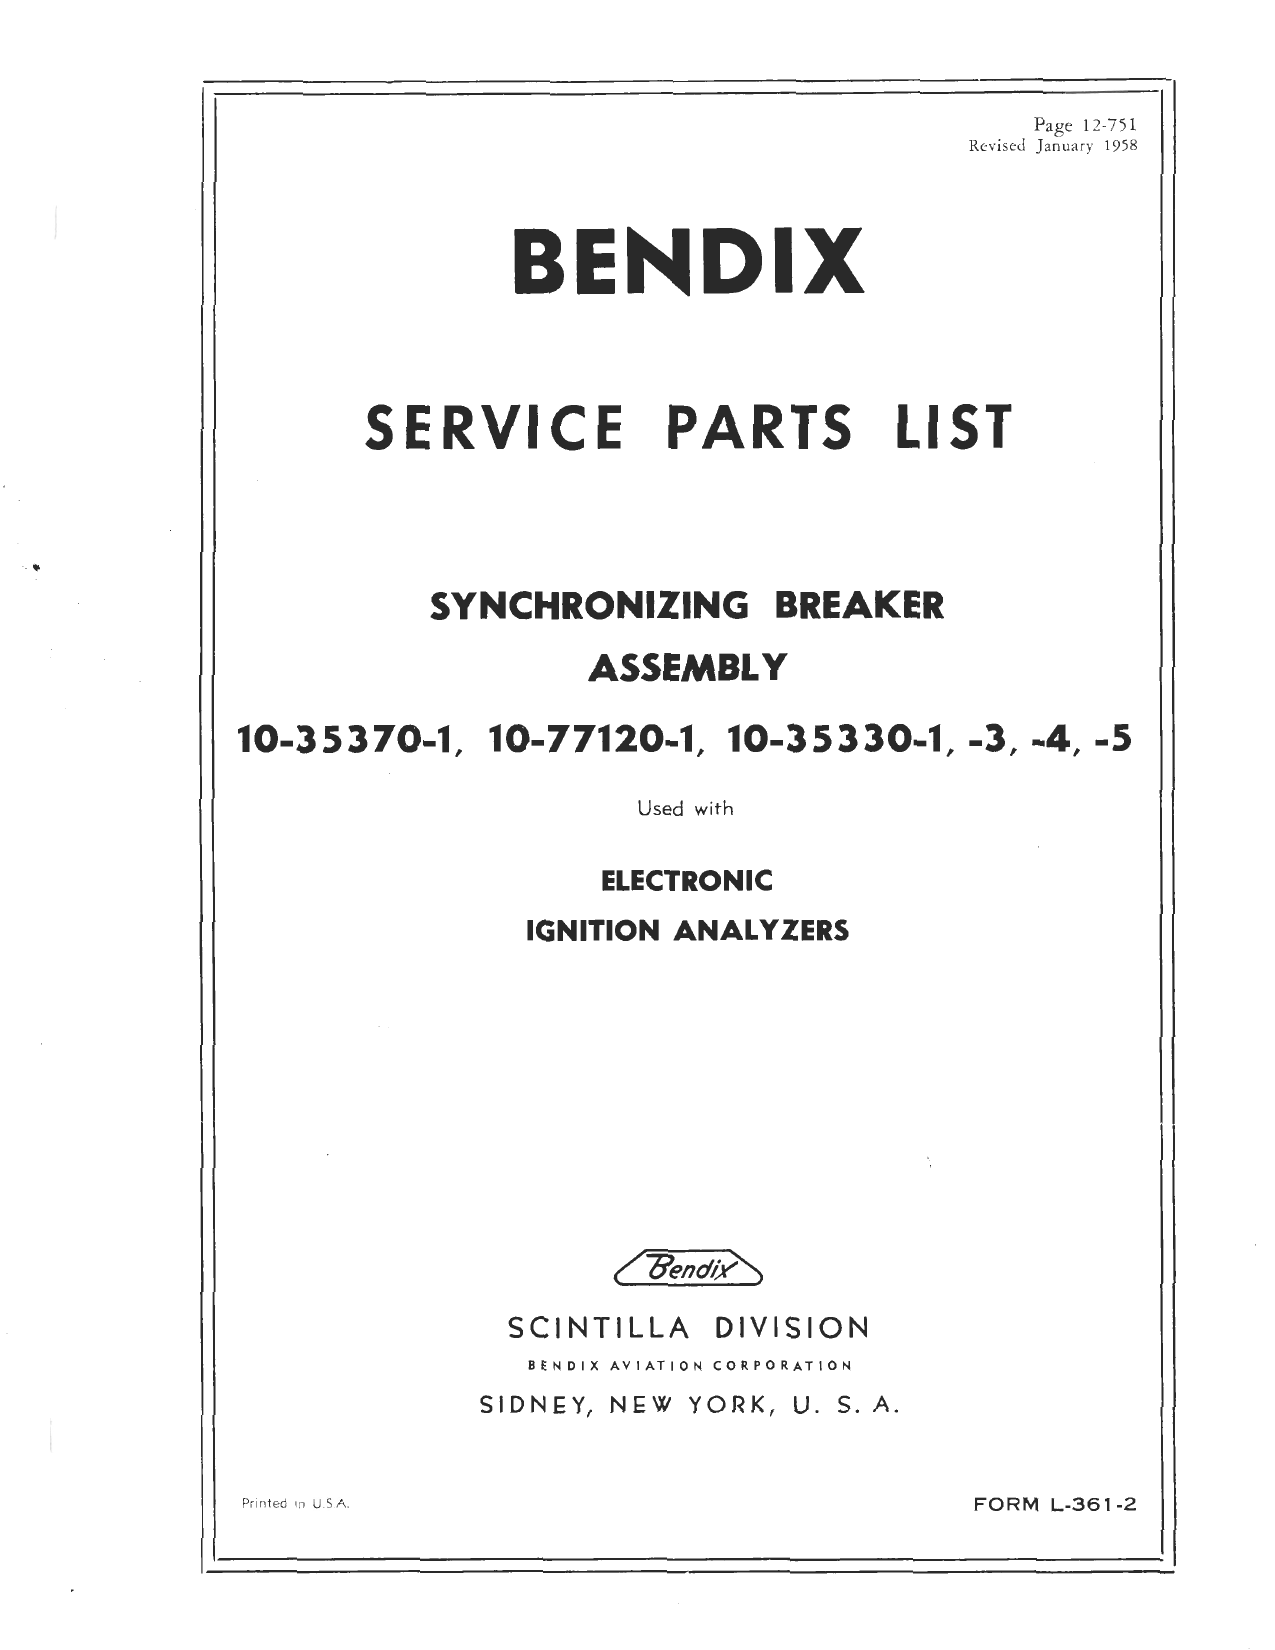 Sample page 1 from AirCorps Library document: Service Parts List for Synchronizing Breaker Assembly - 10-35370-1, 10-77120-1, 10-35330-1, 10-35330-3, 10-35330-4, and 10-35330-5